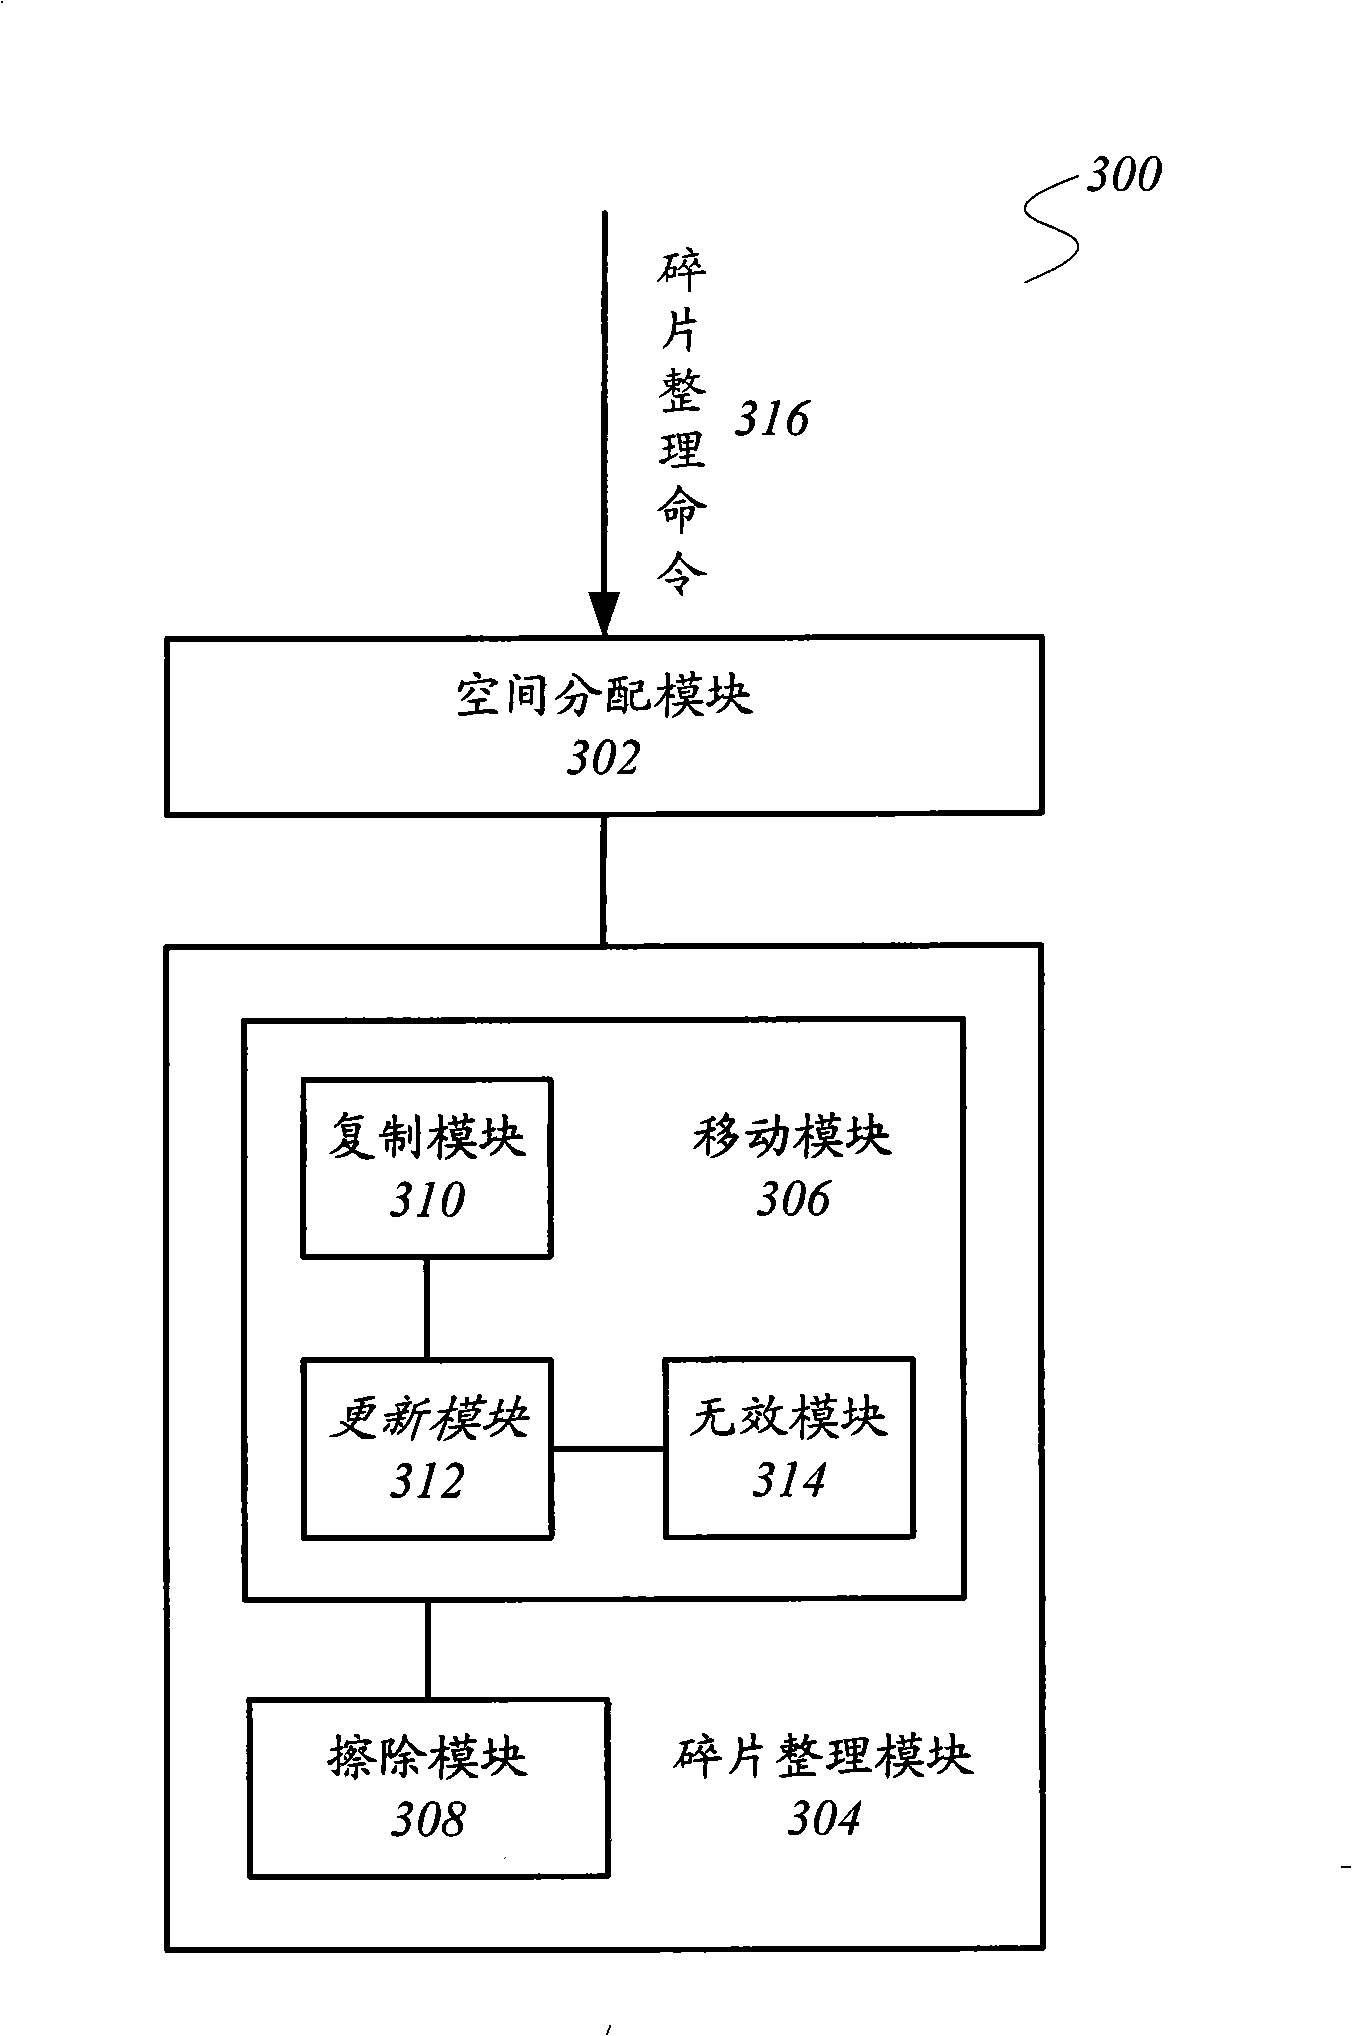 Method and system for arranging file chips